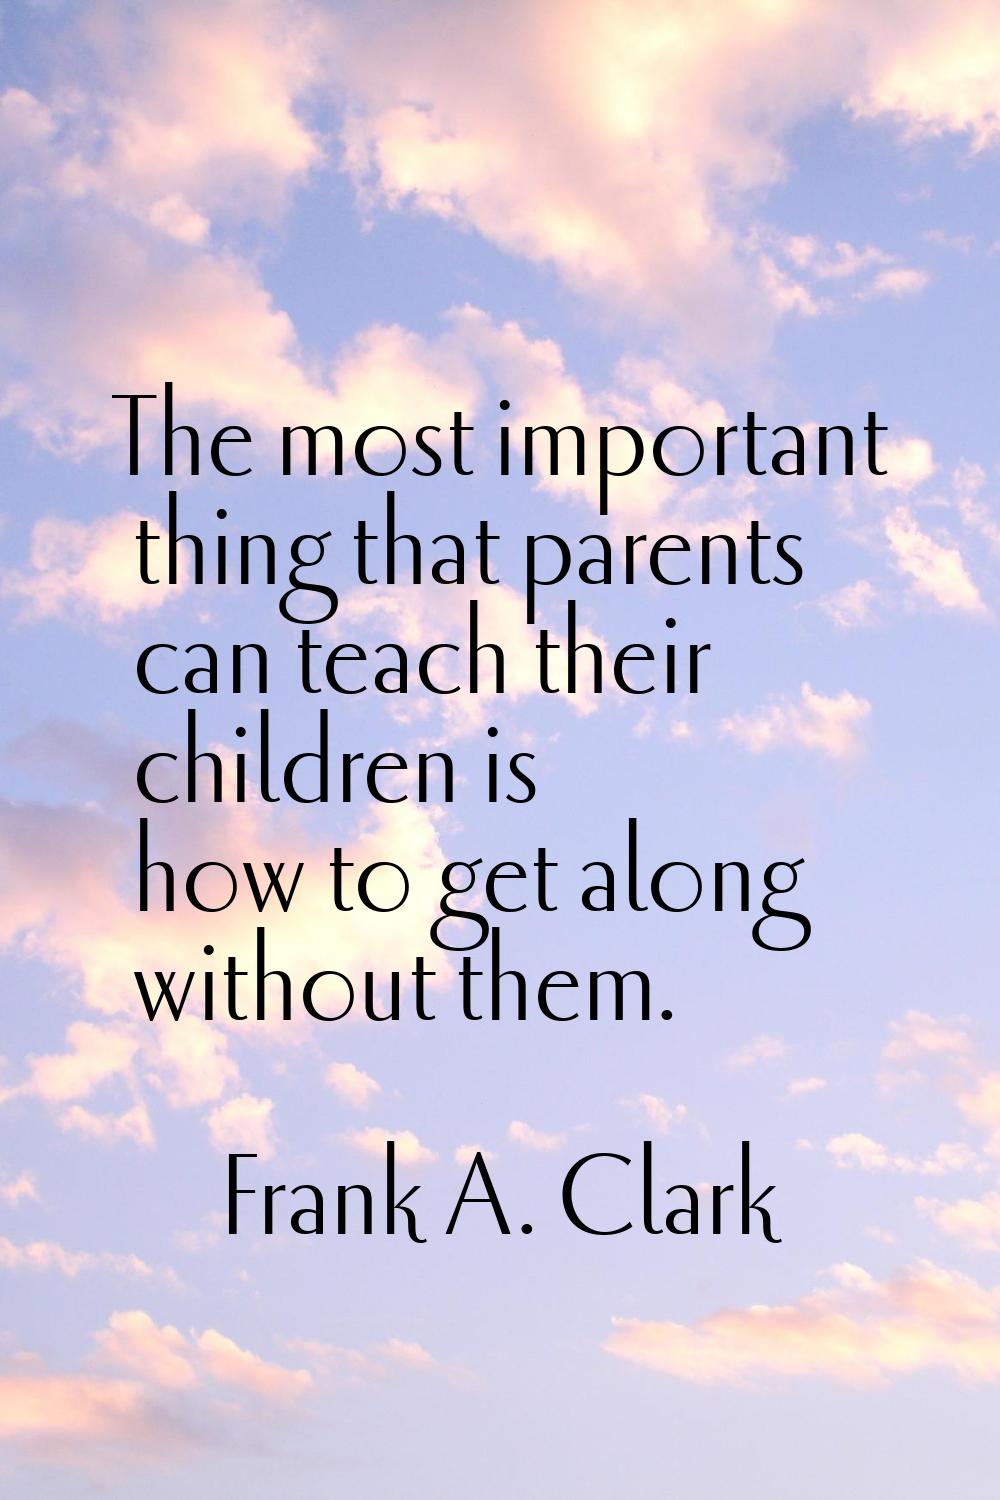 The most important thing that parents can teach their children is how to get along without them.